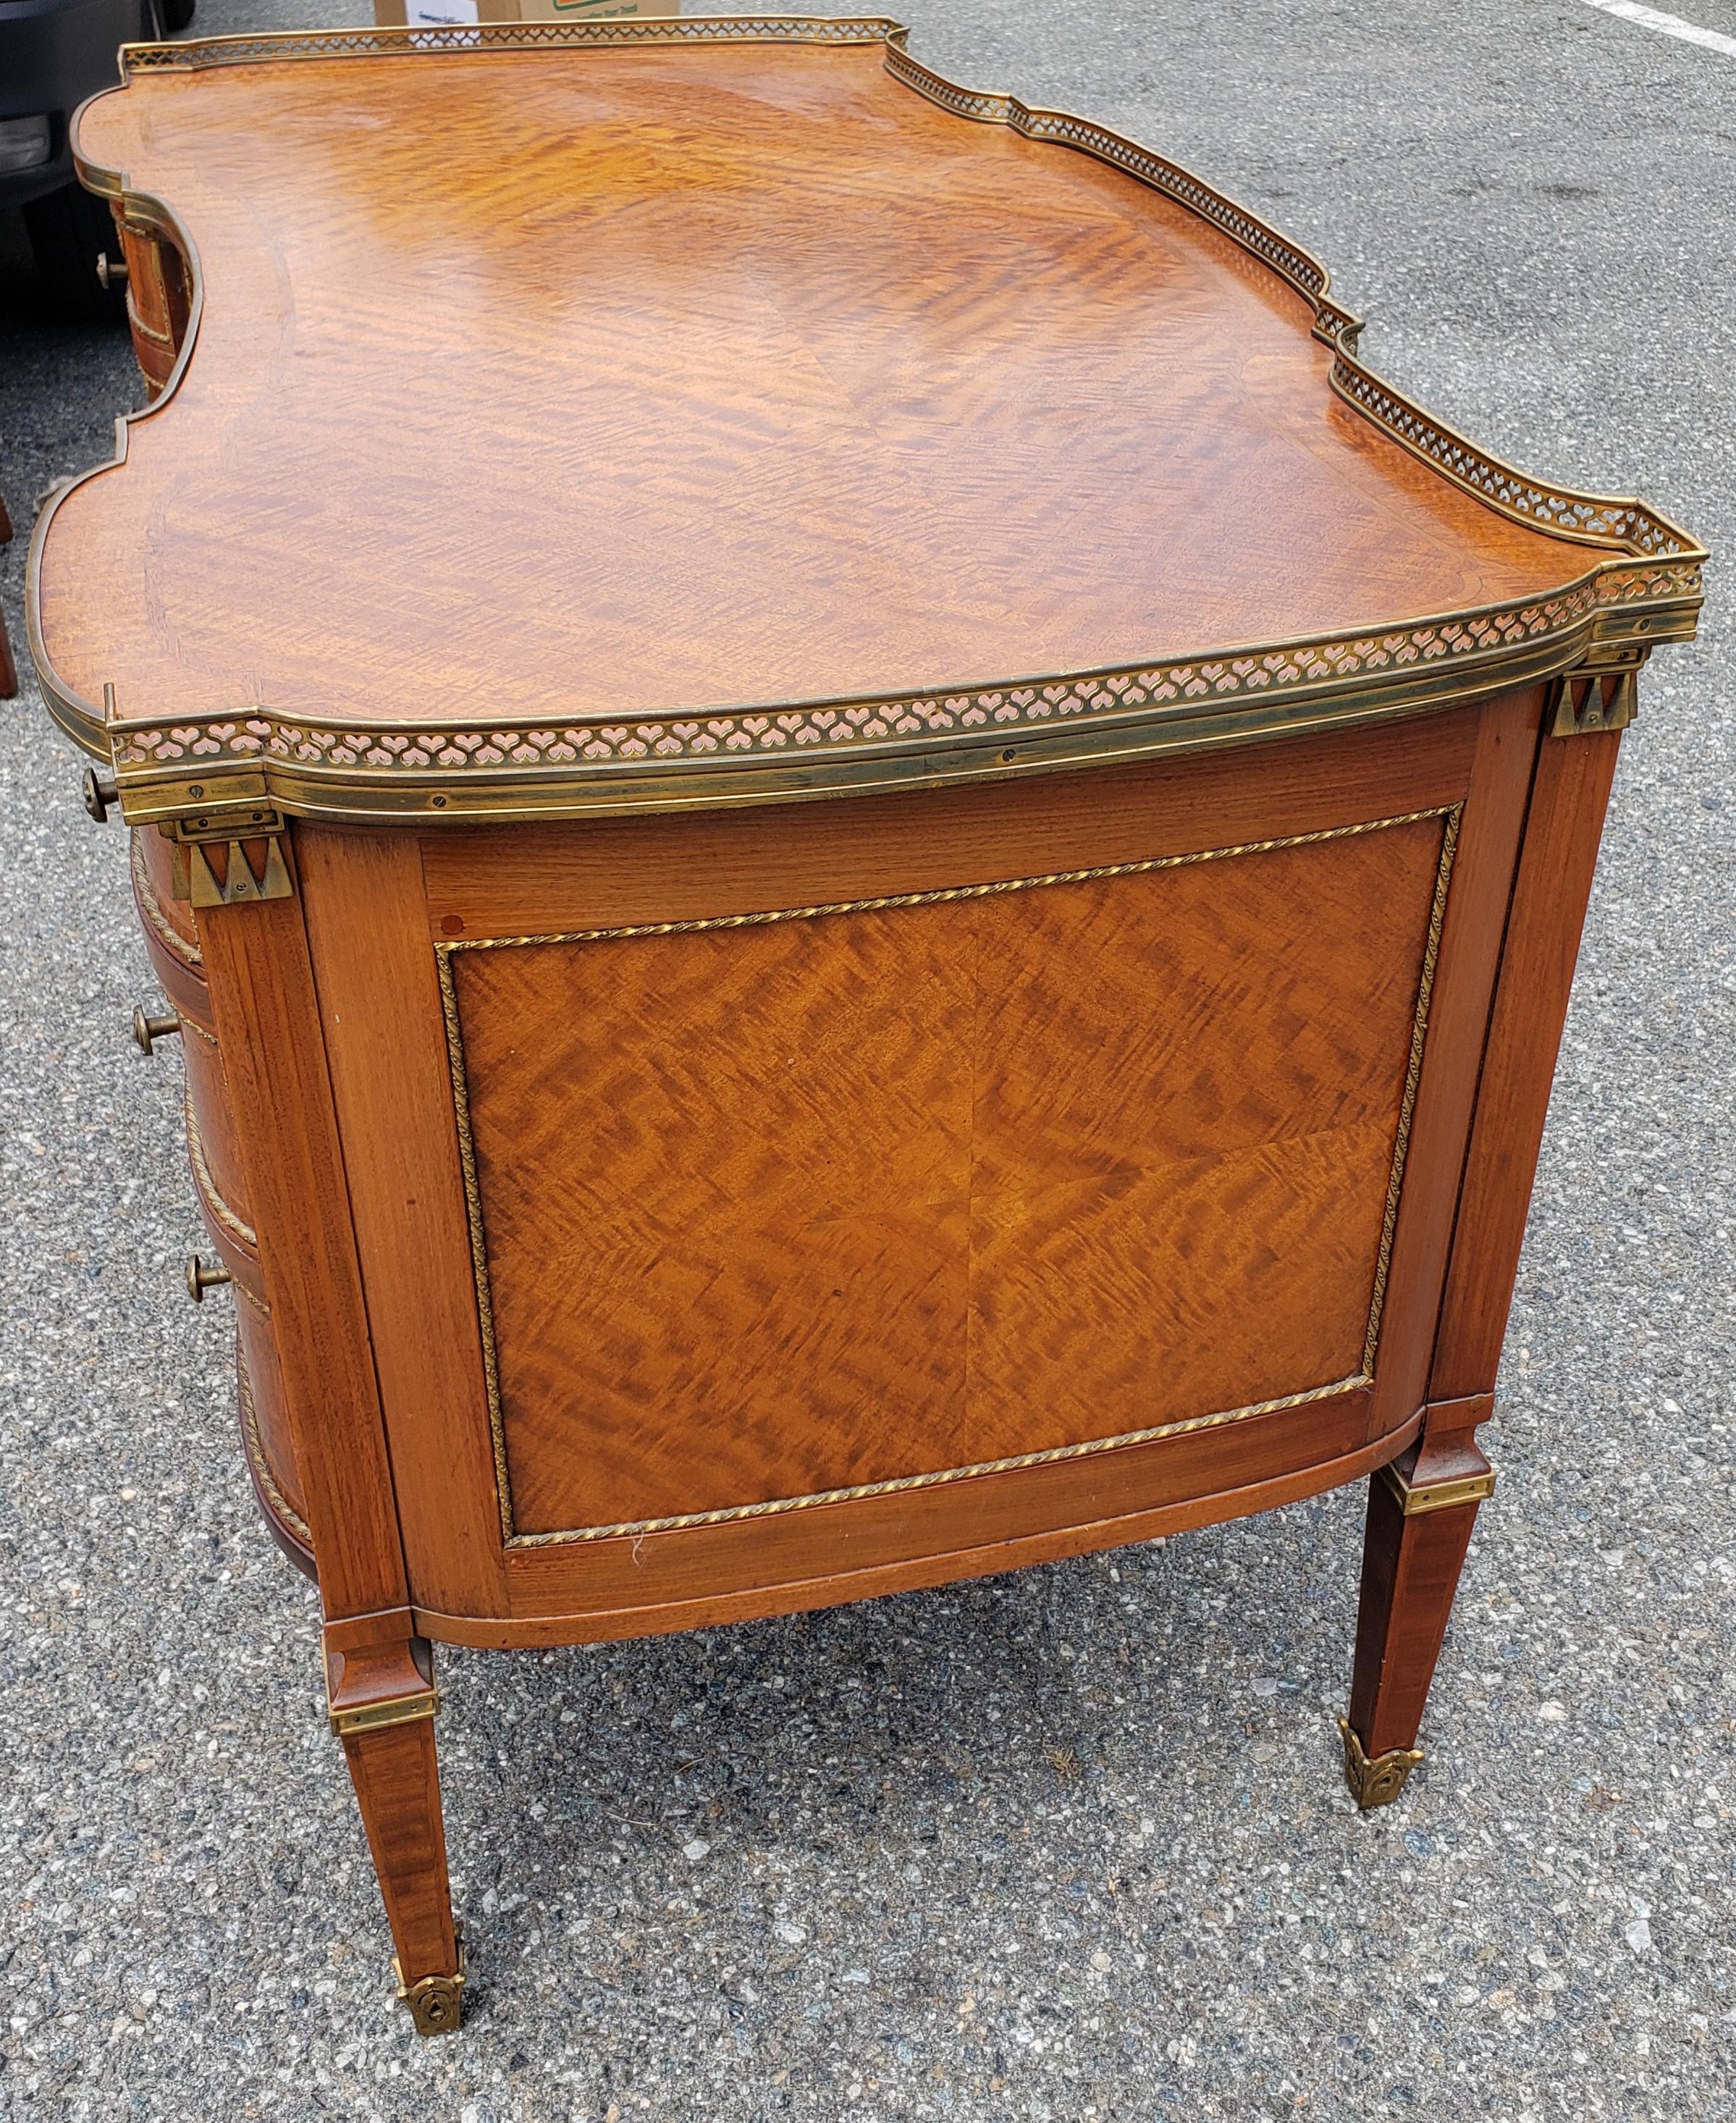 Louis XVI Style Ormolu Mounted Galleried Mahogany Burl and Marquetry Desk  For Sale 6